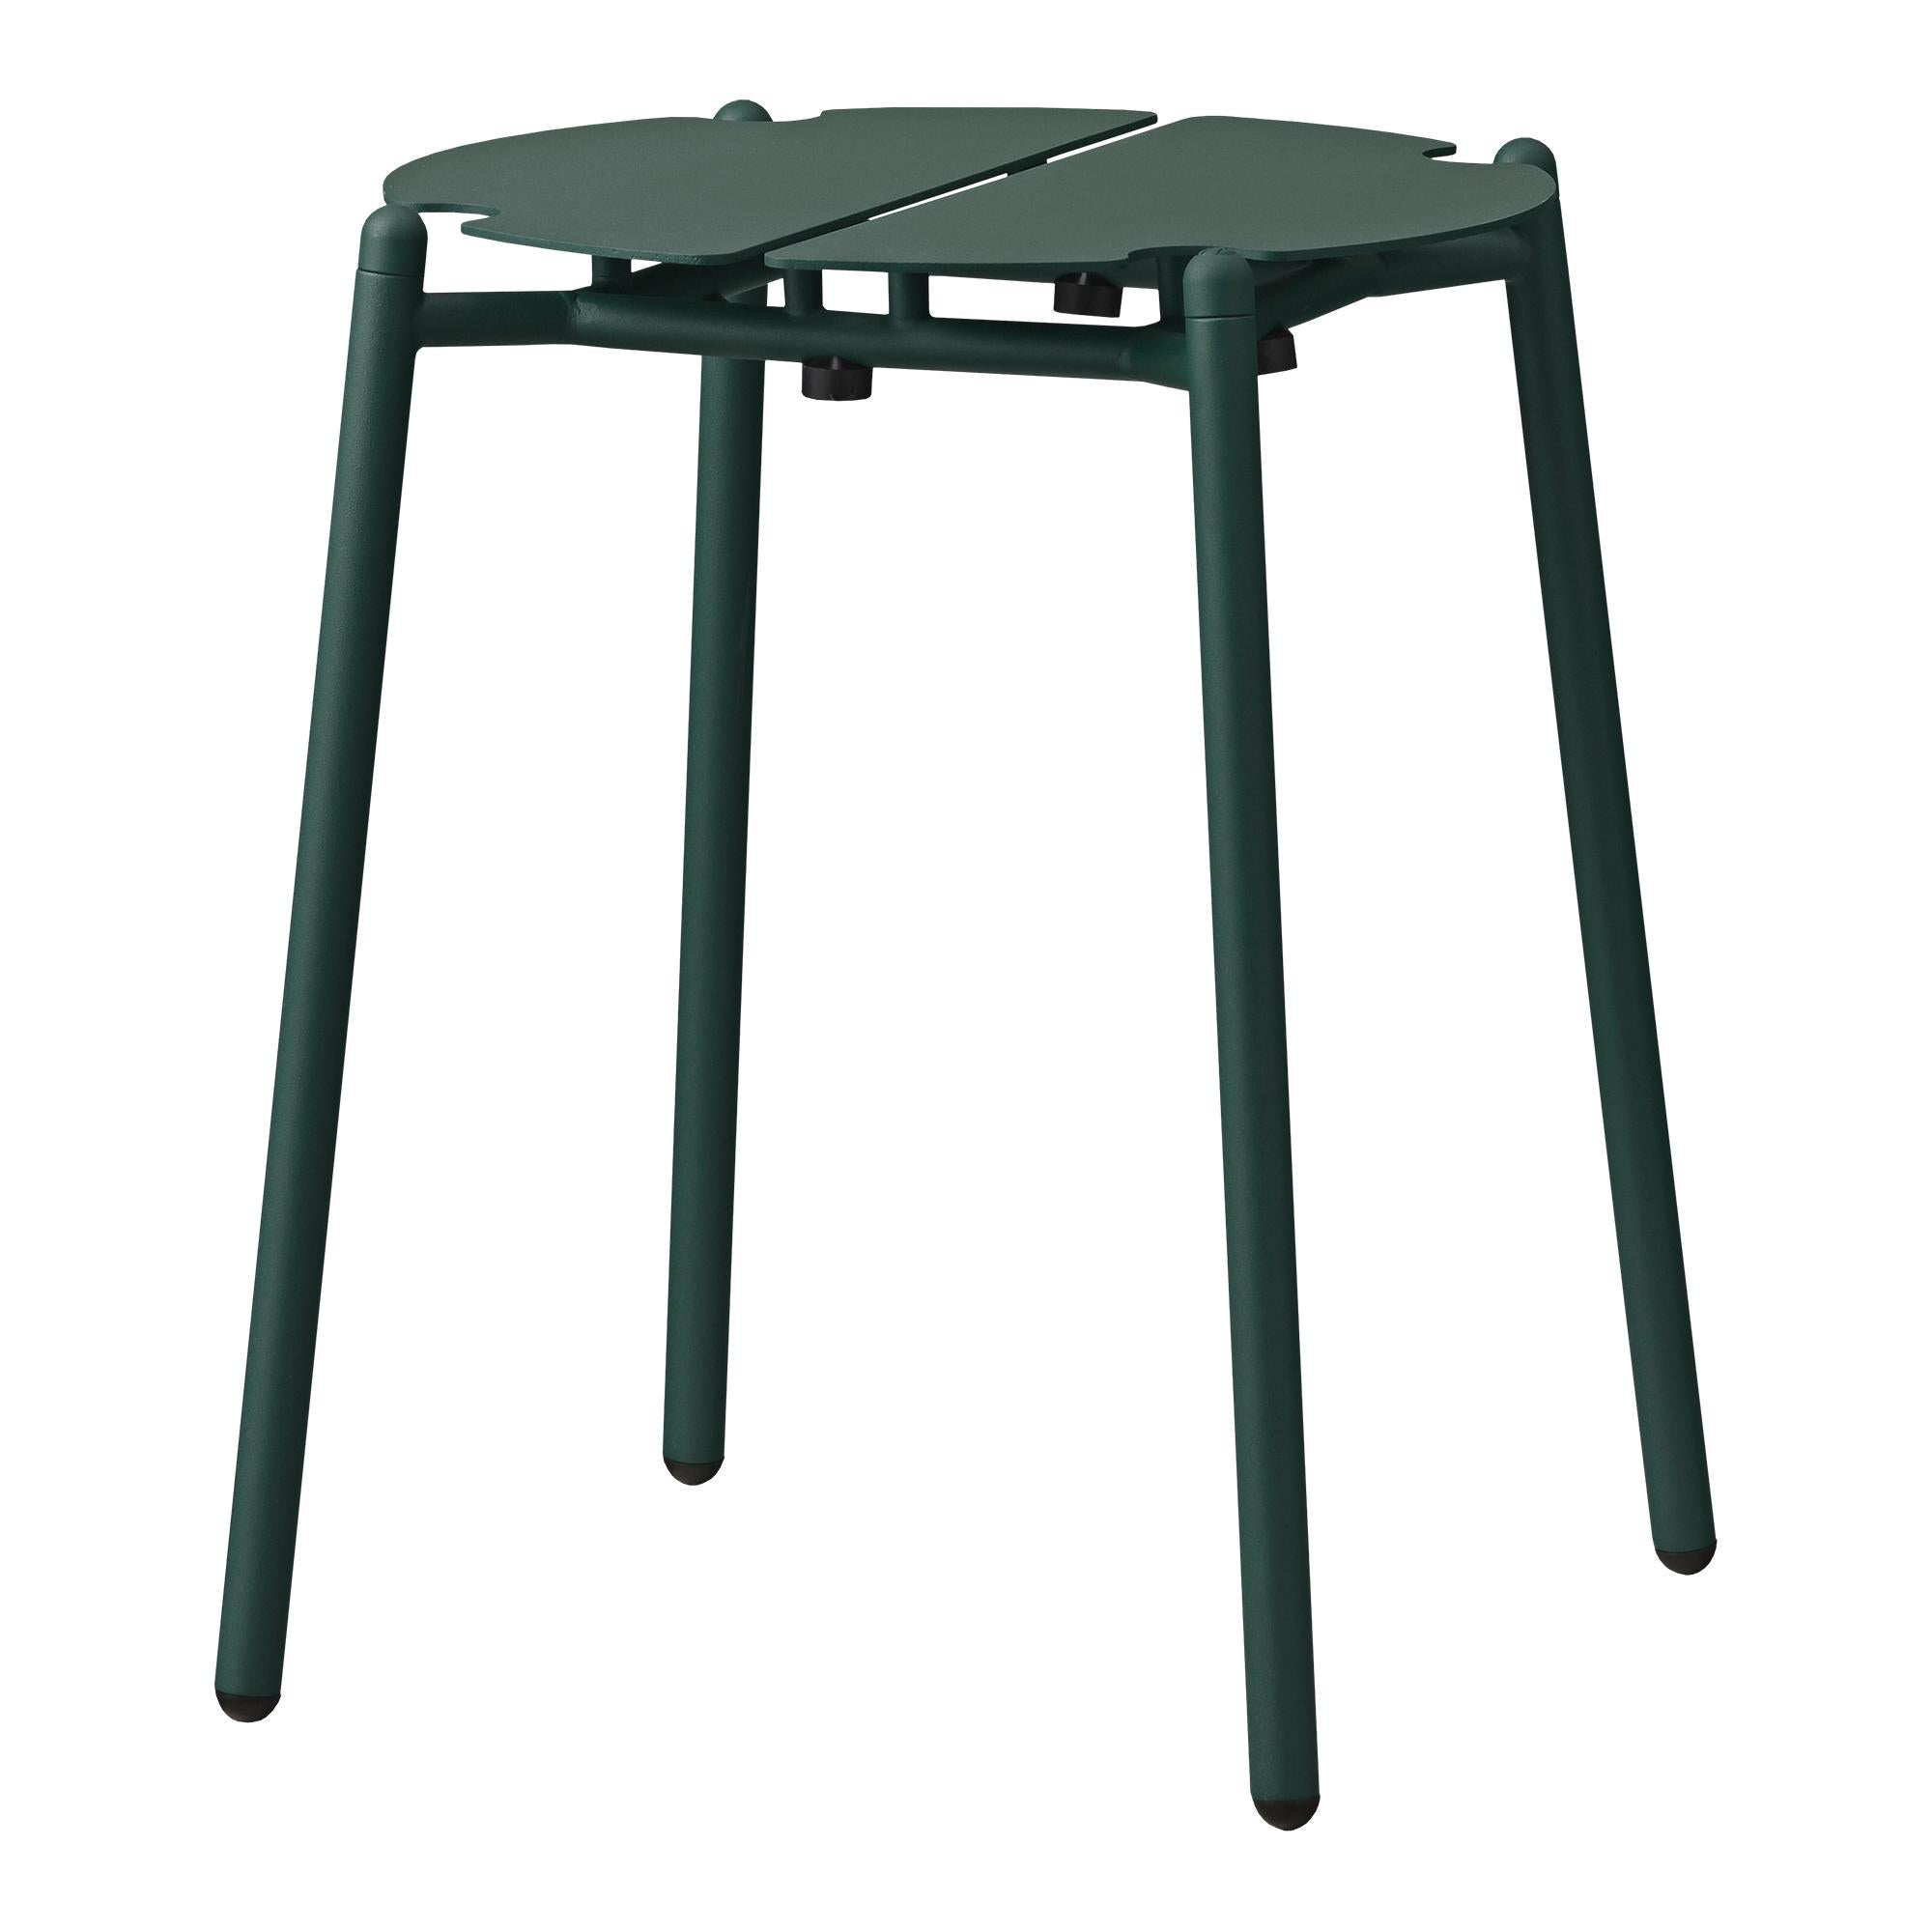 Forest minimalist stool
Dimensions: Diameter 35 x height 45 cm 
Materials: Steel w. Matte powder coating & aluminum w. Matte powder coating.
Available in colors: Taupe, bordeaux, forest, ginger bread, black and, black and gold.


The NOVO